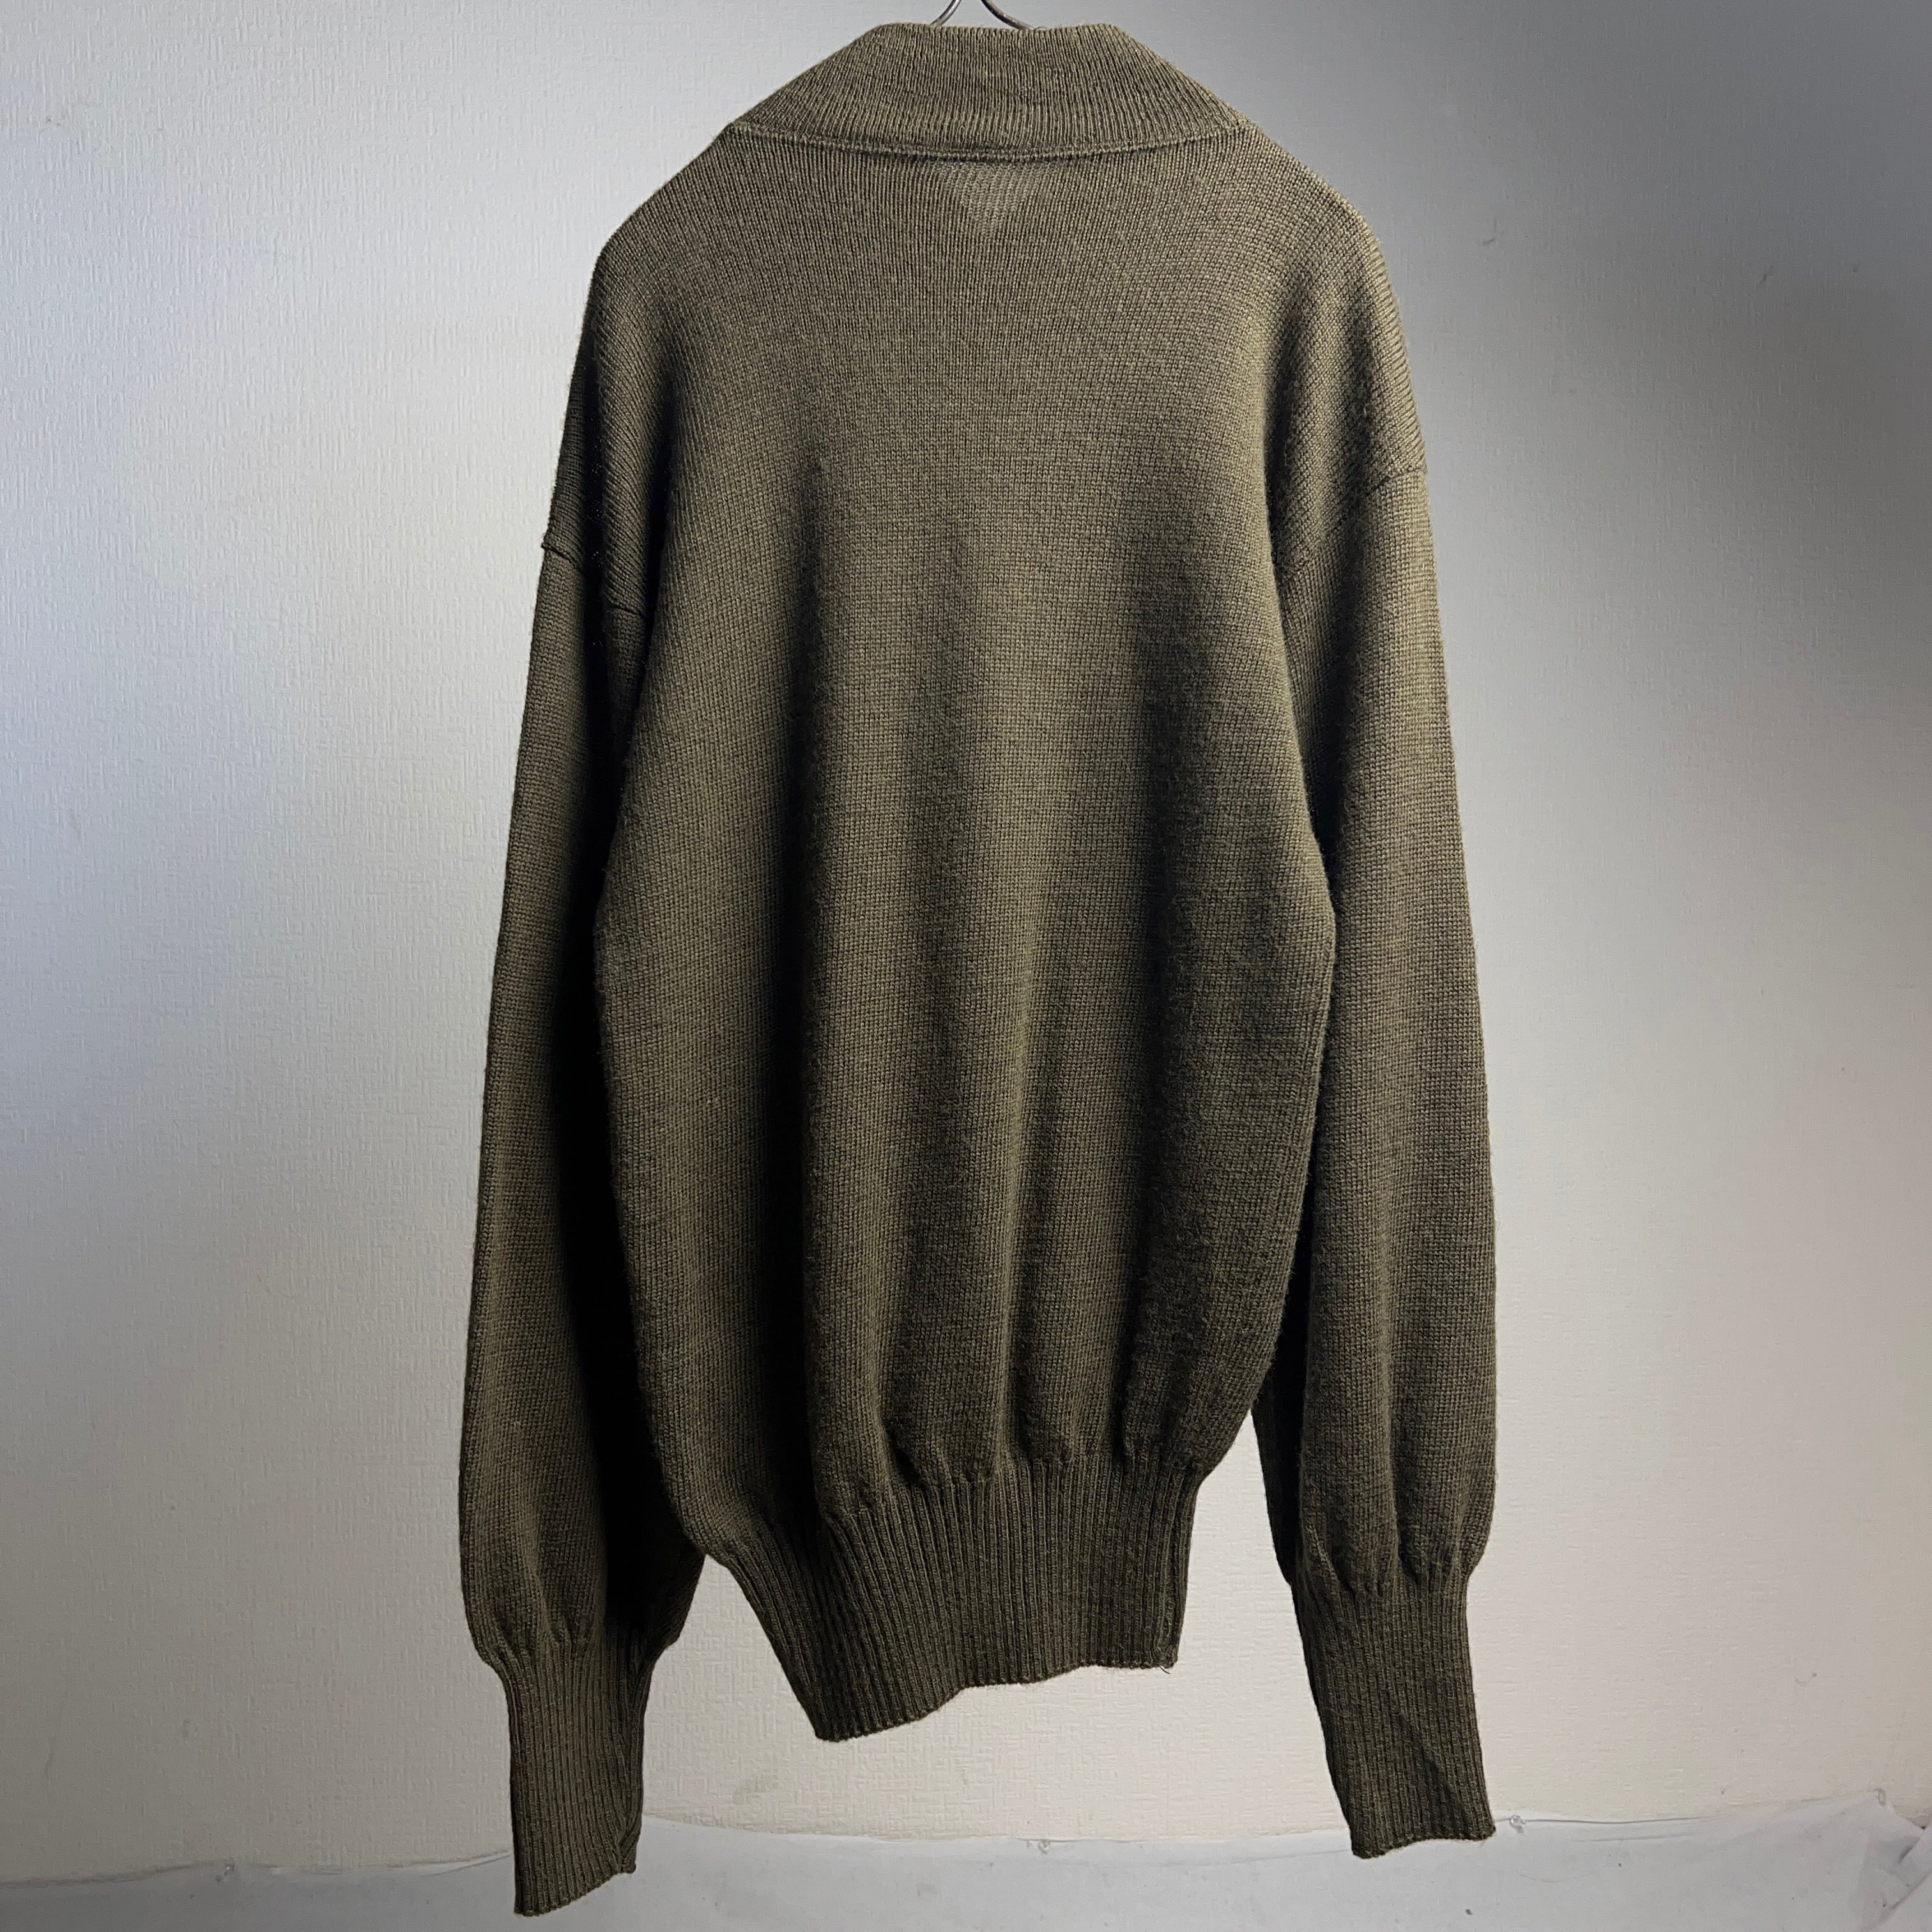 U.S.ARMY 5 Button Henley Neck Knit アメリカ軍 5ボタン ヘンリー